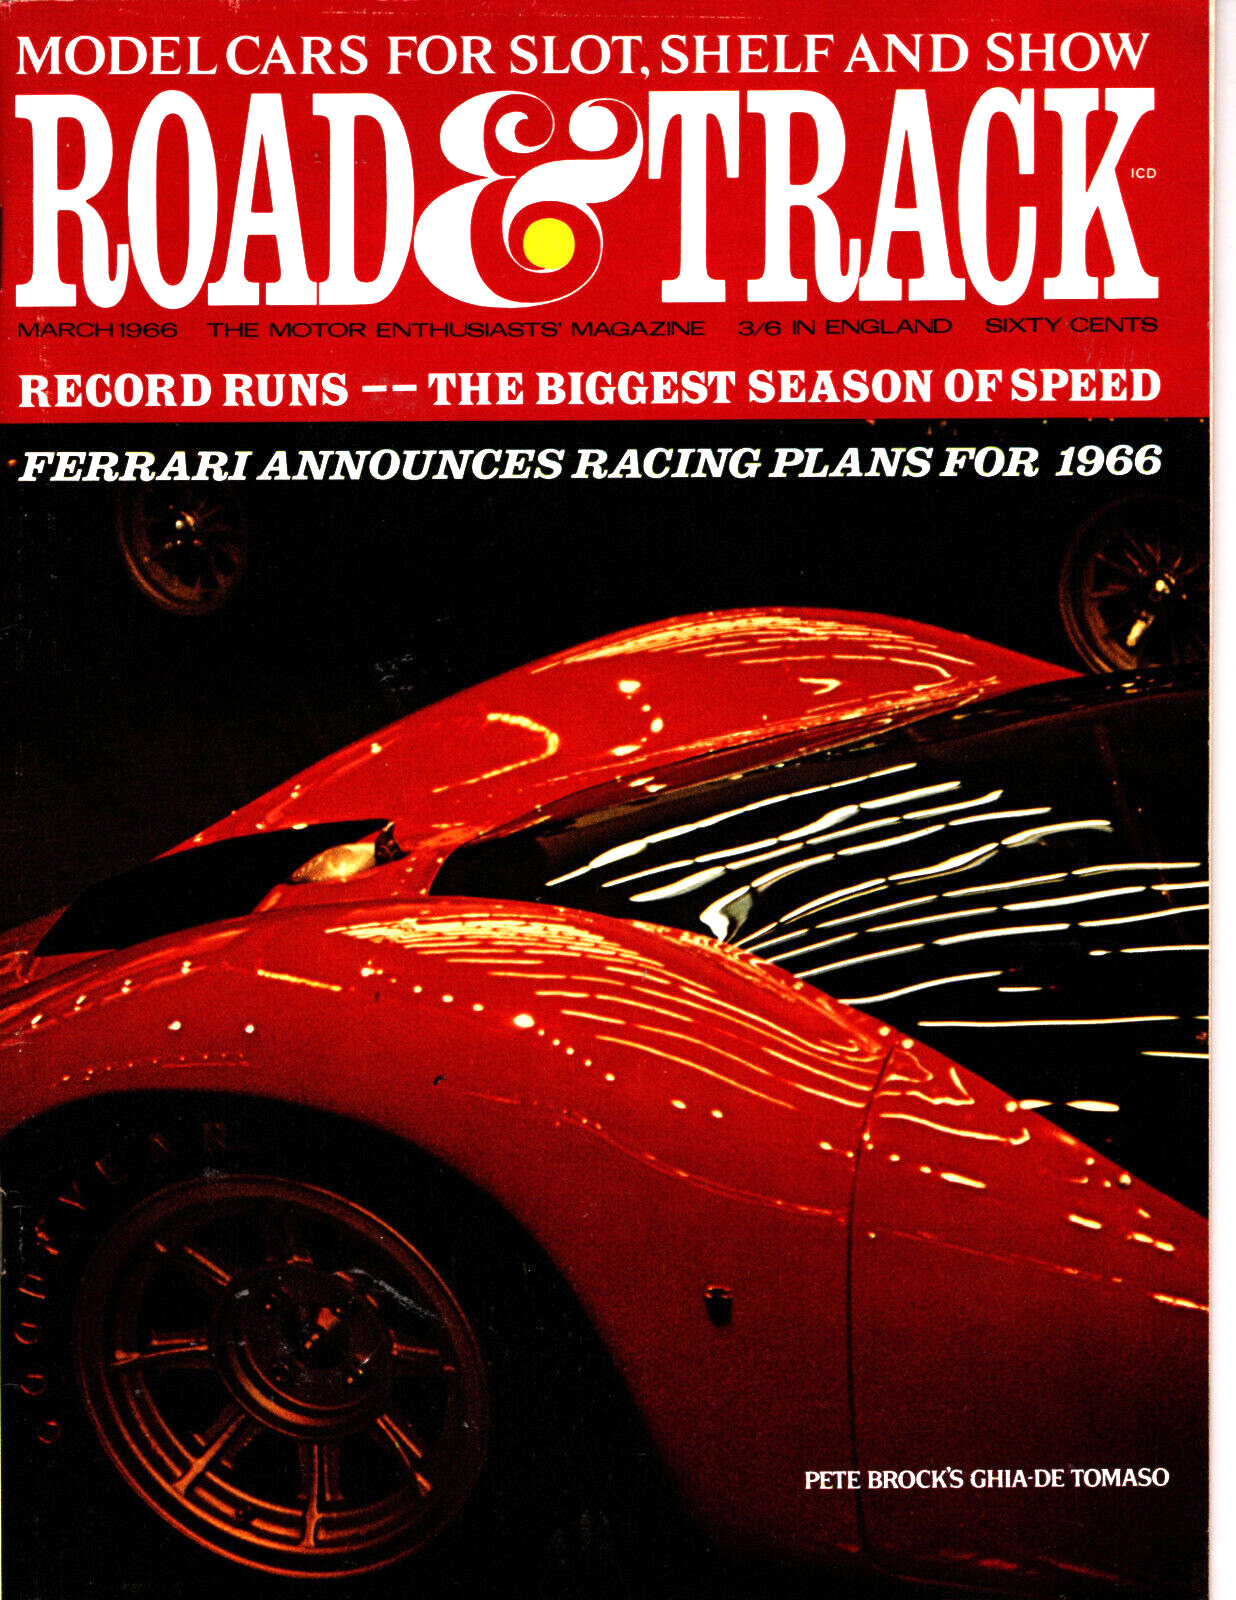 Road & Track Magazine - March 1966 Issue